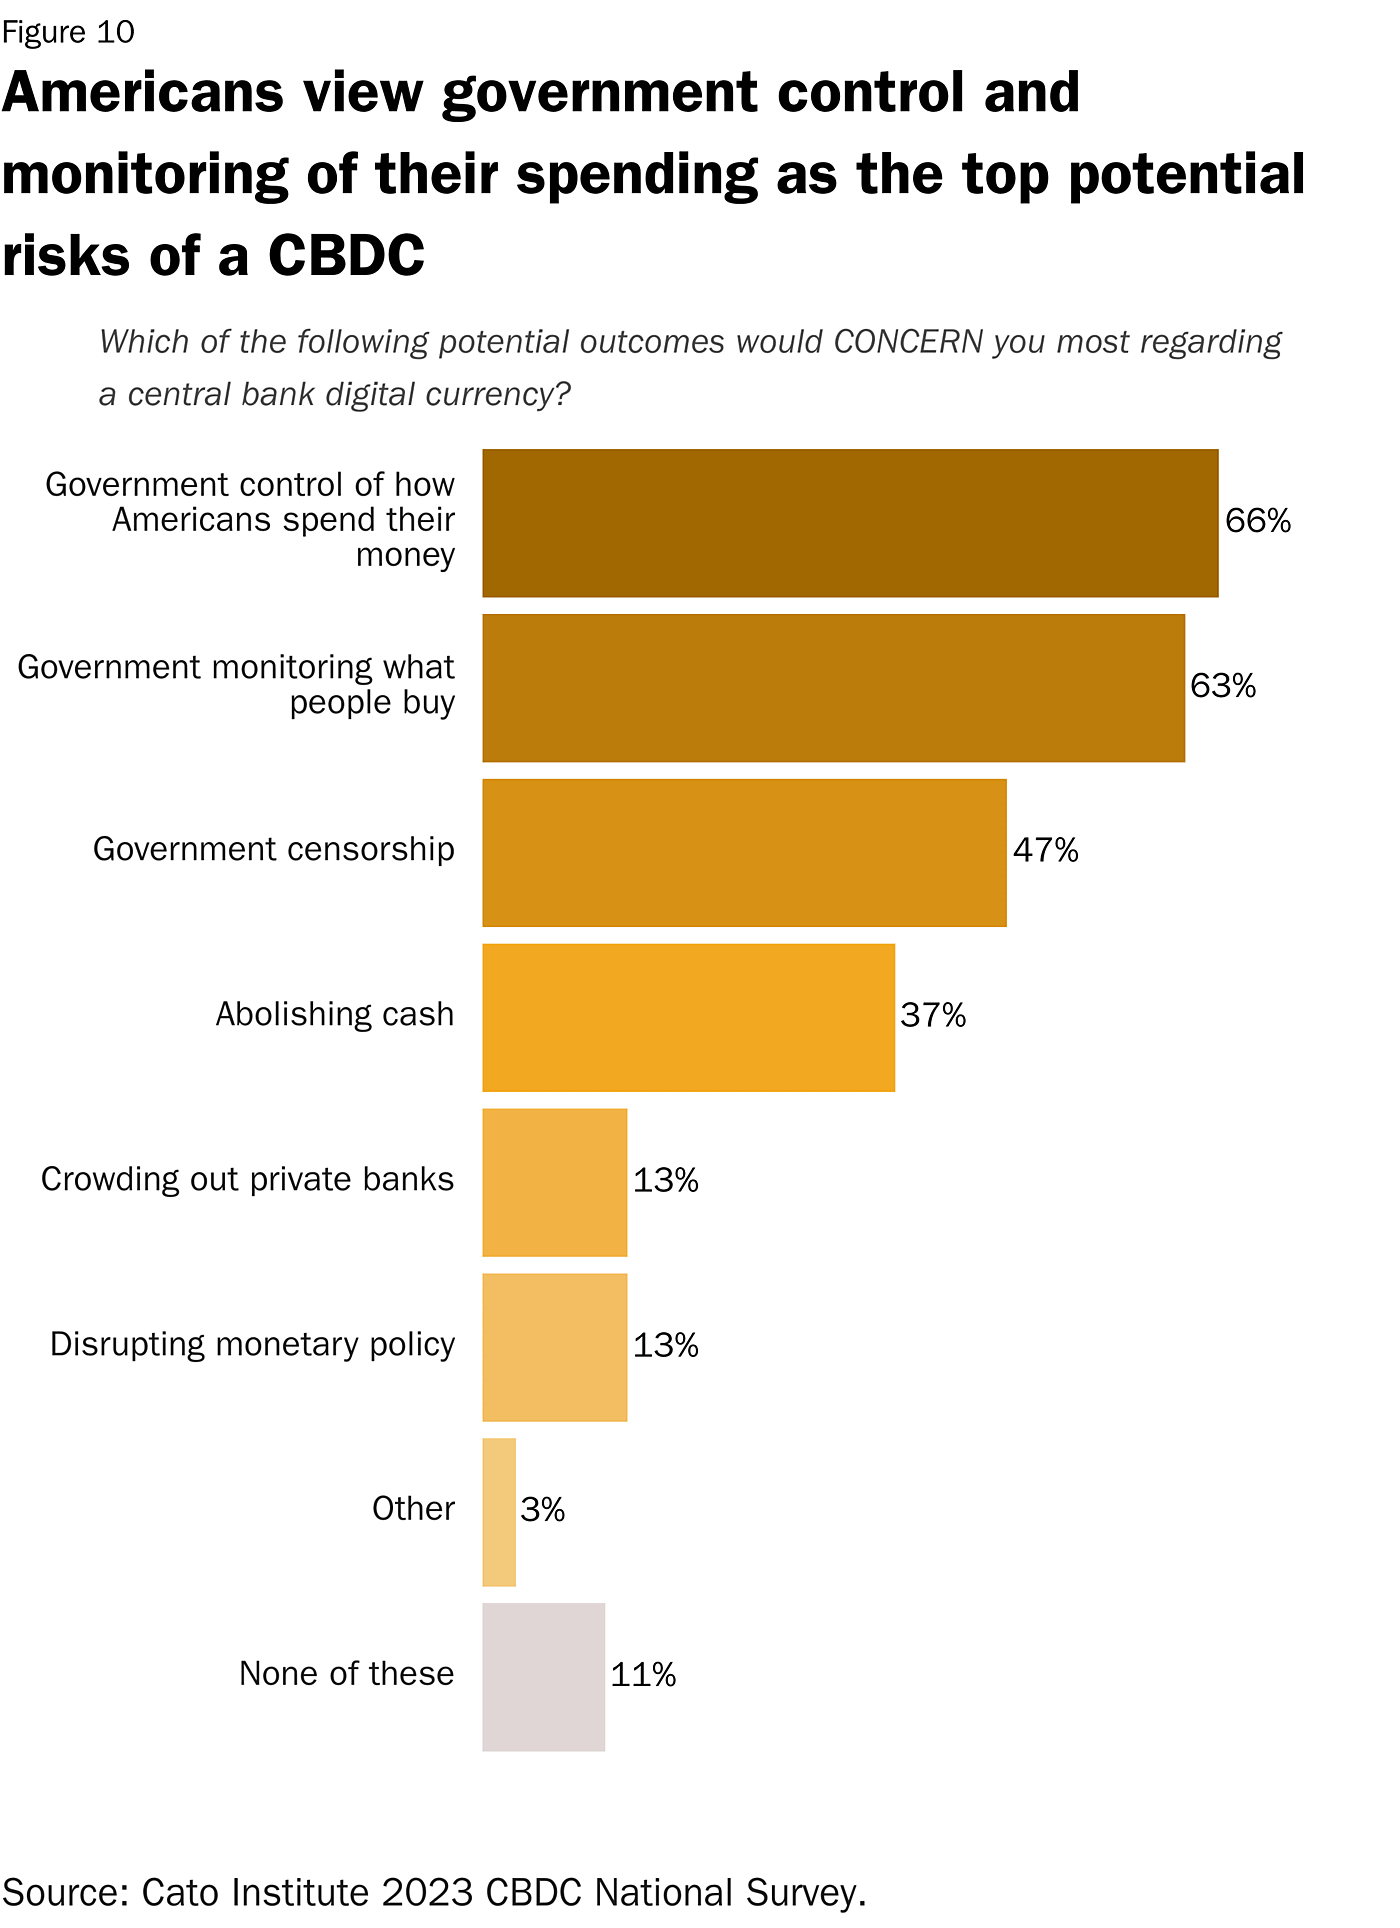 Figure 10: Top Concerns for Americans